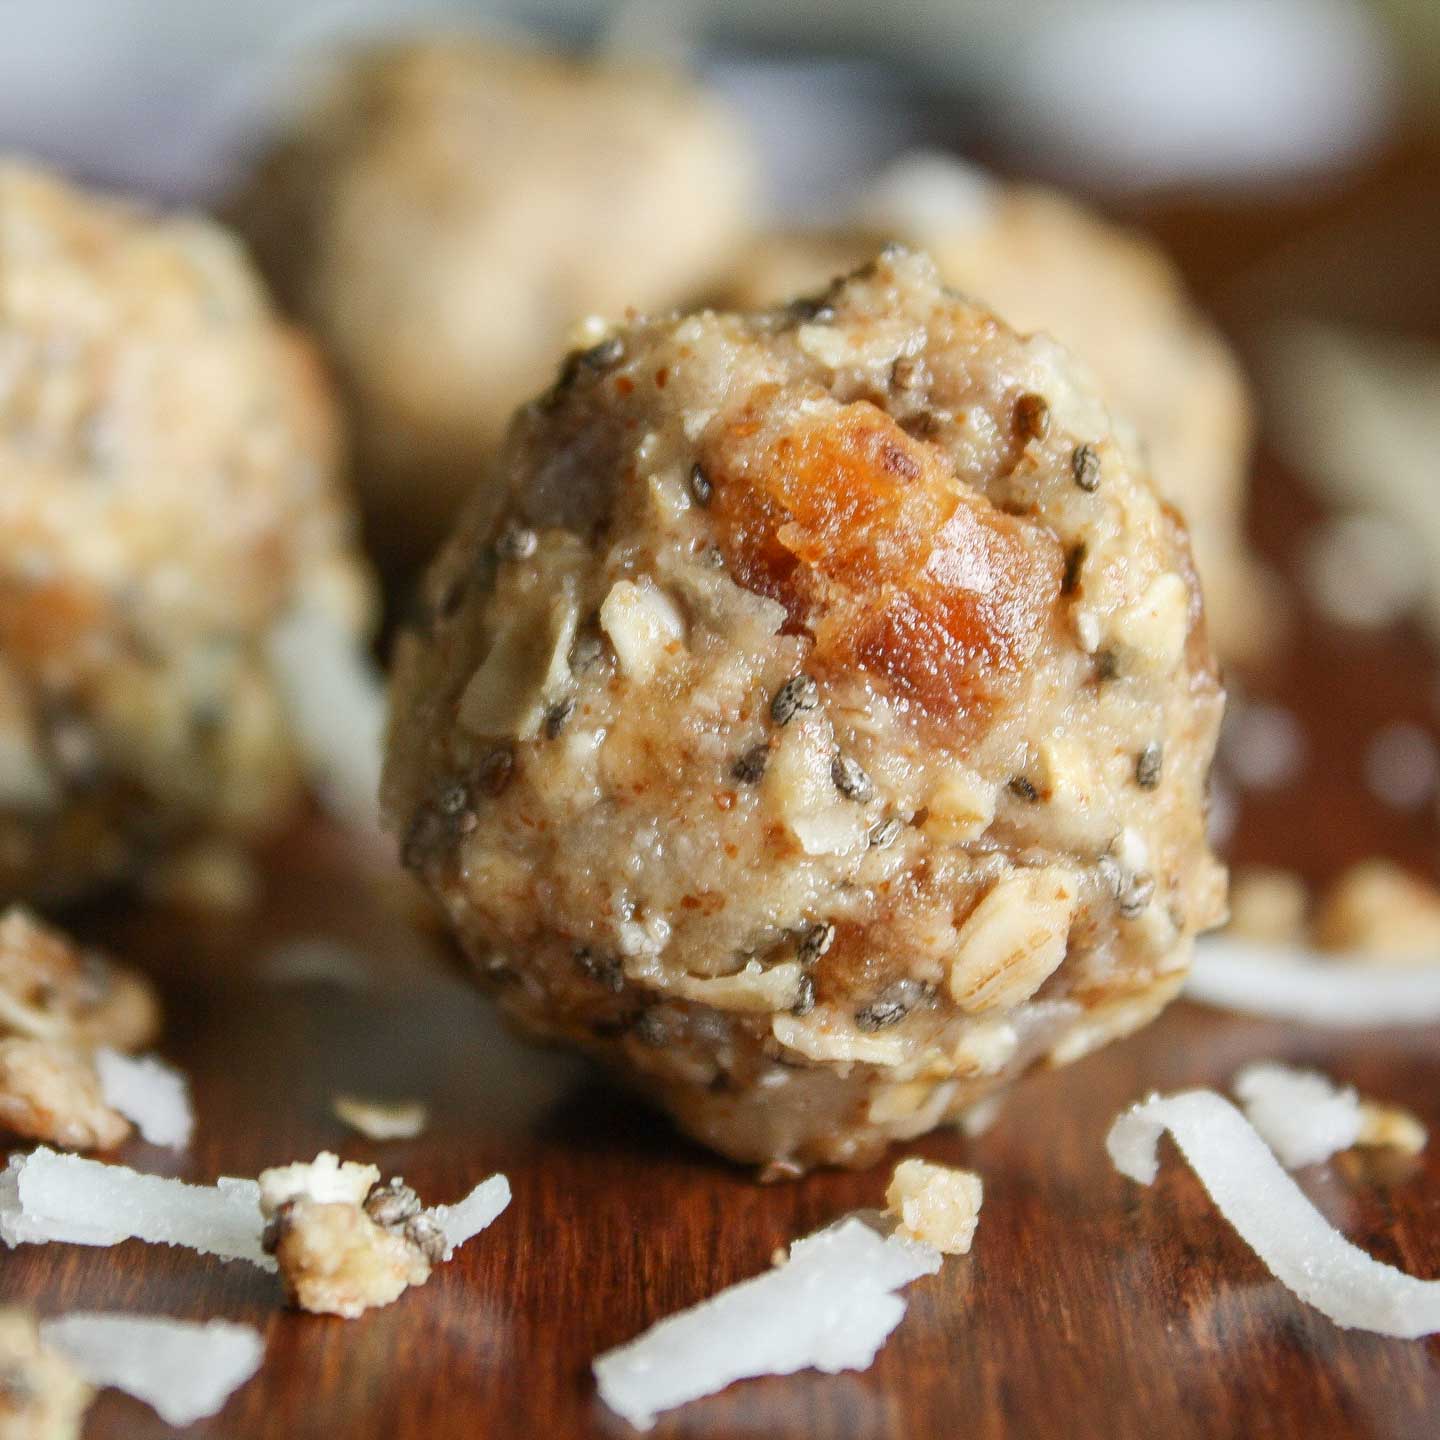 Closeup of finished energy bite, with several more balls in background and ingredients like coconut flakes laying around.